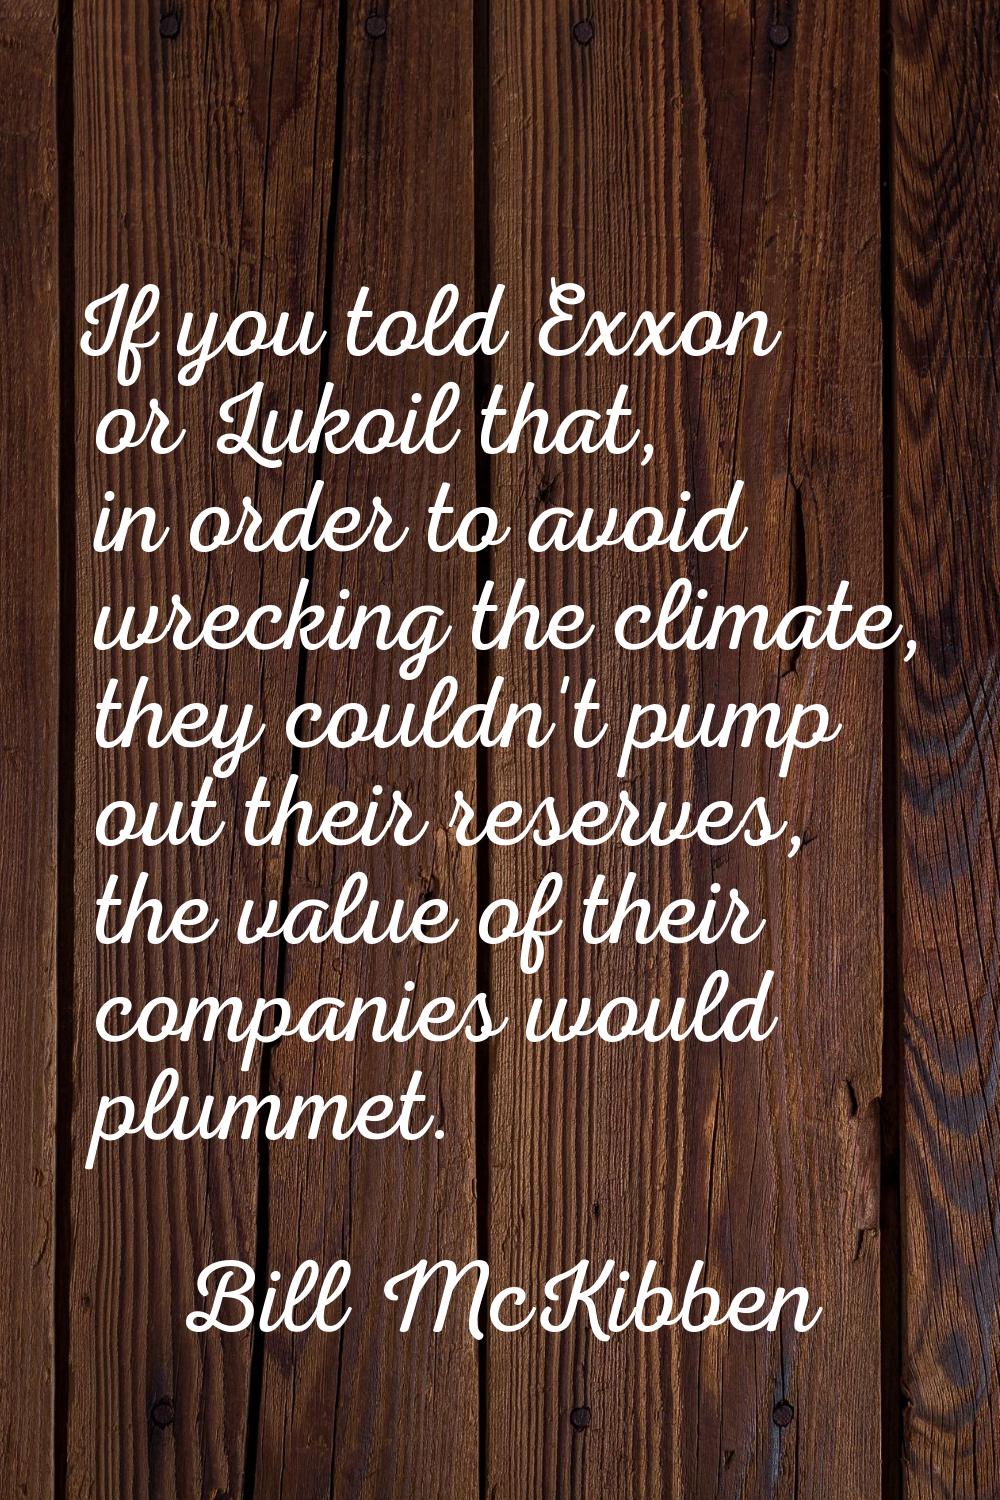 If you told Exxon or Lukoil that, in order to avoid wrecking the climate, they couldn't pump out th